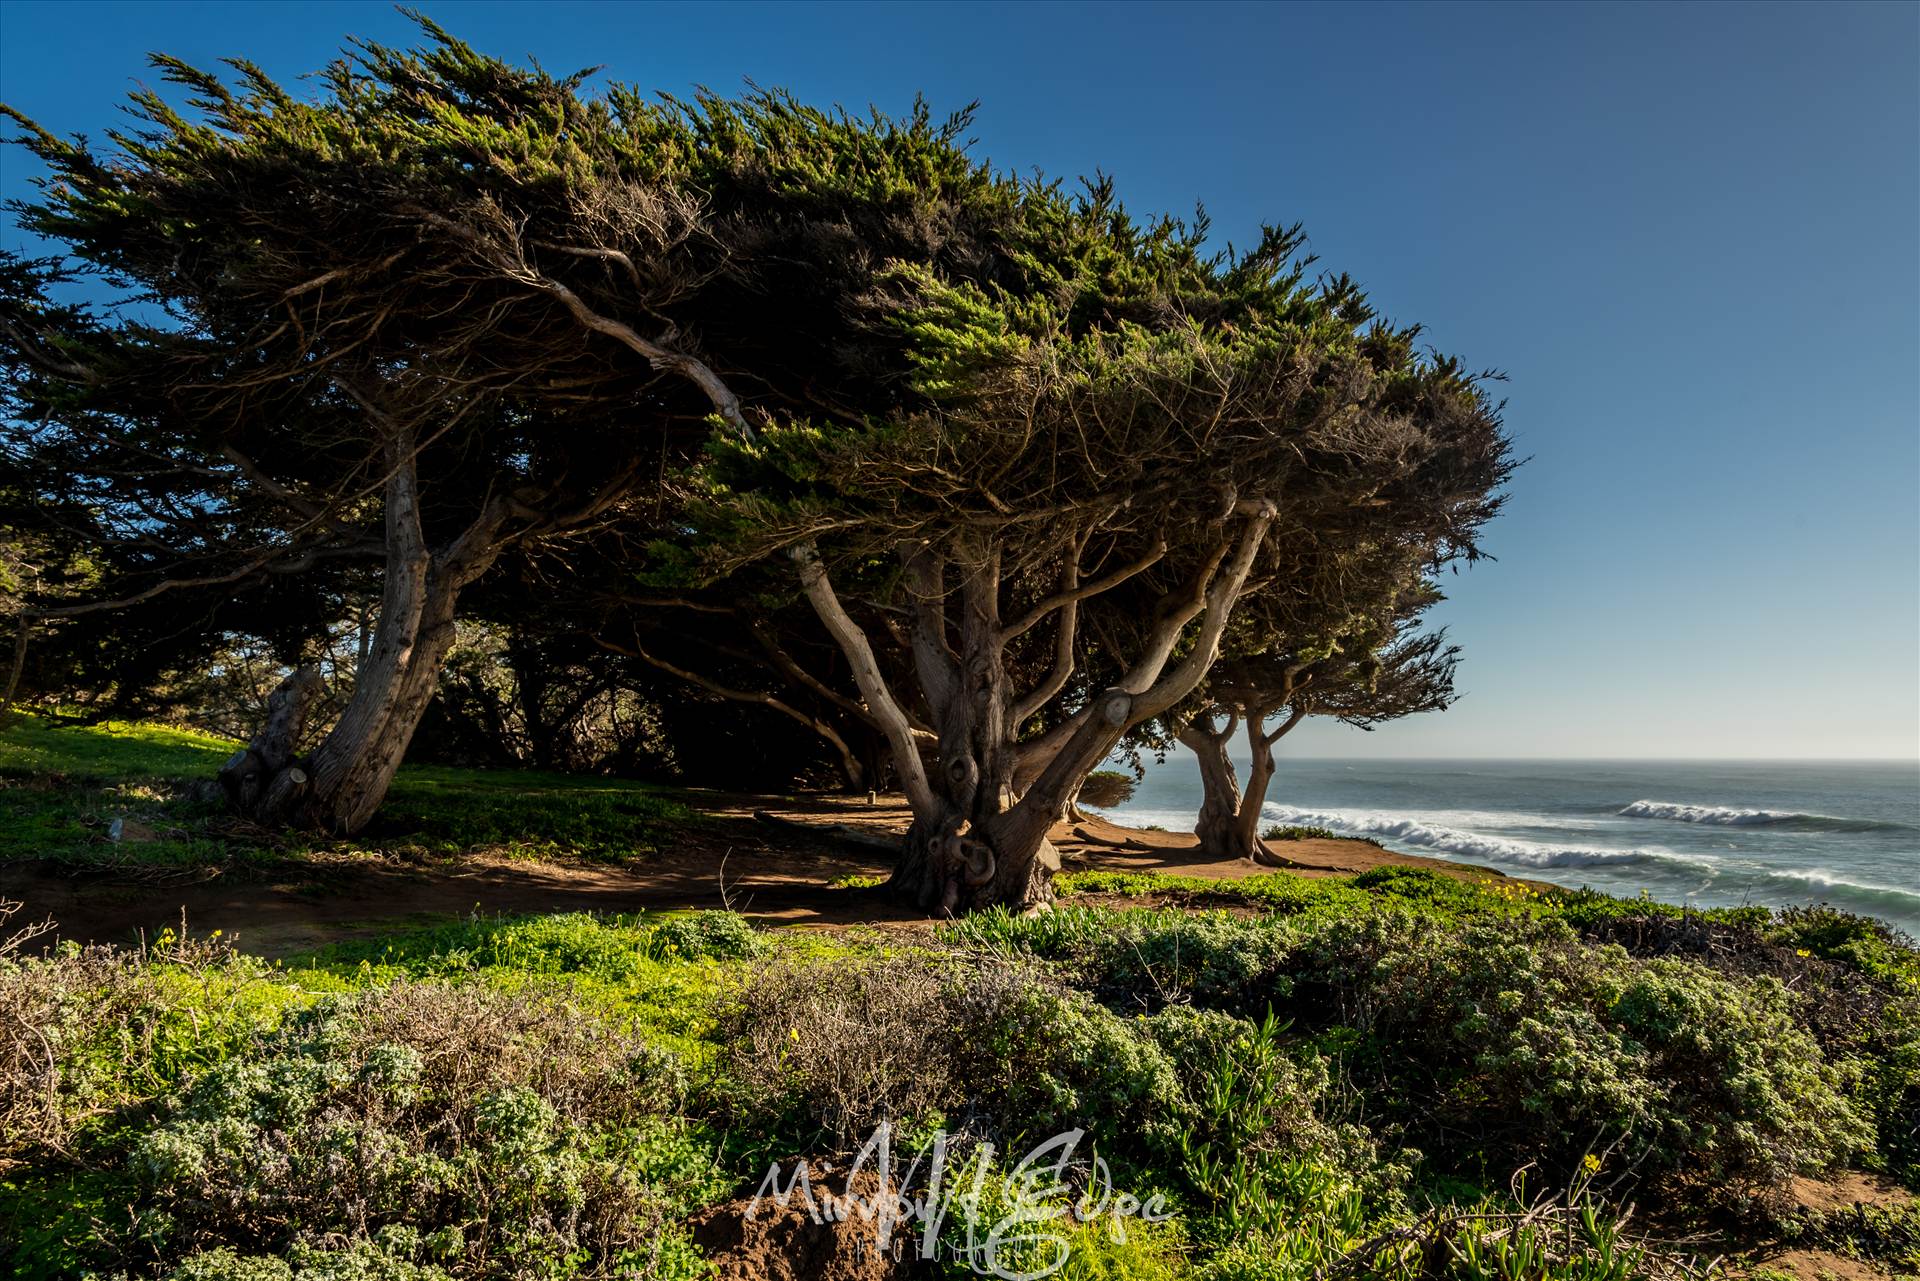 Cambria Pine by the Sea 02132016.jpg - undefined by Sarah Williams